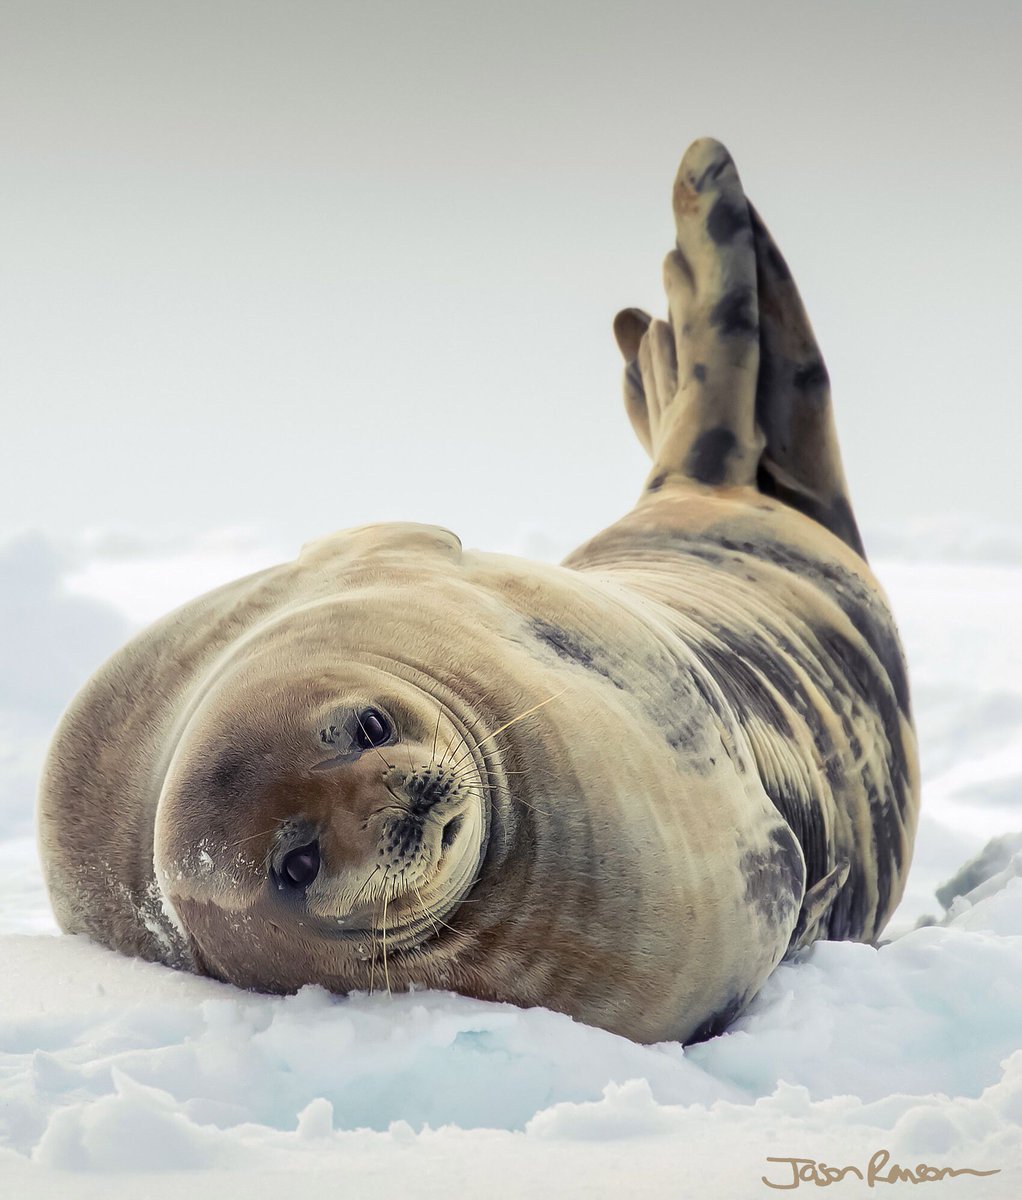 A #WeddellSeal chills out on #CuvervilleIsland in #Antarctica. The Weddell seal (a true seal) was discovered by James Weddell, a British captain who explored parts of the Southern Ocean in the 1820s. They’re abundant with an estimated 800,000 individuals living on the continent.